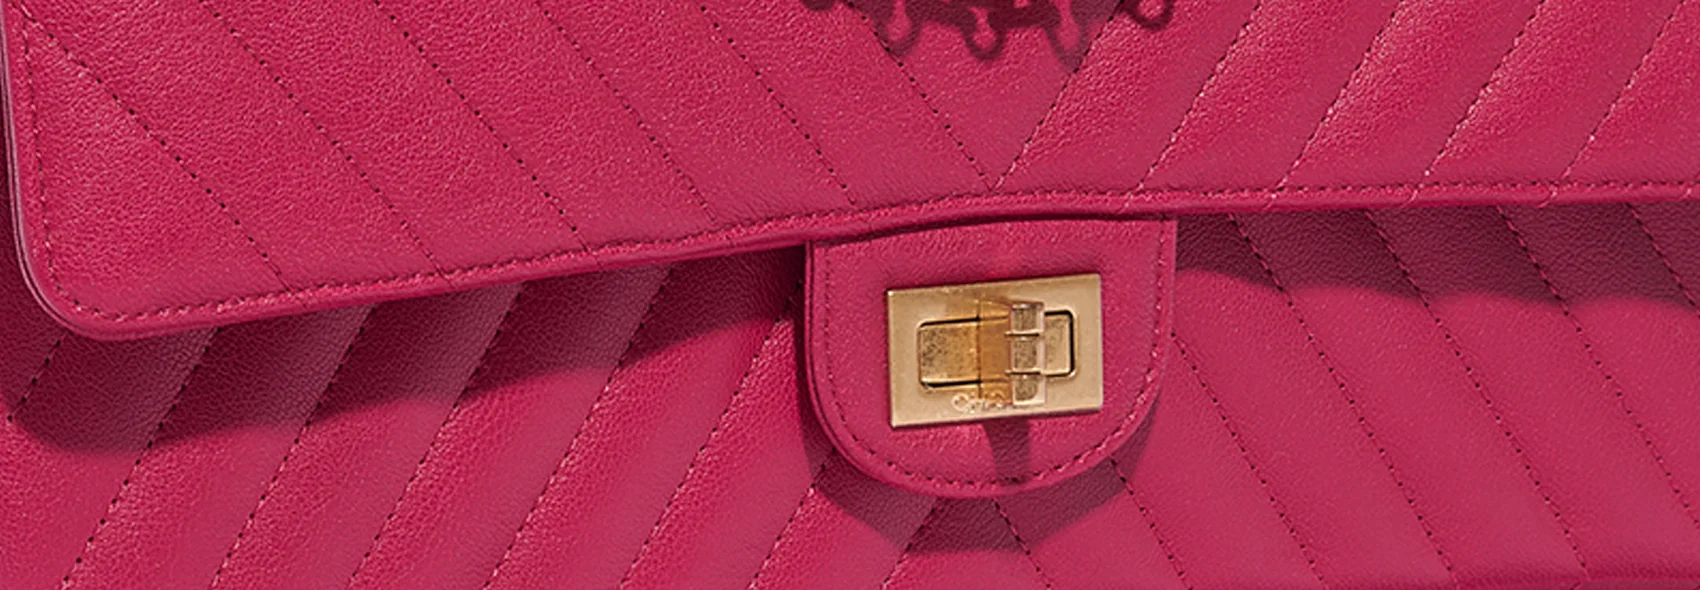 Chanel 2.55 vs. Classic Flap vs. Chanel 2.55 Reissue: Everything You Need To Know